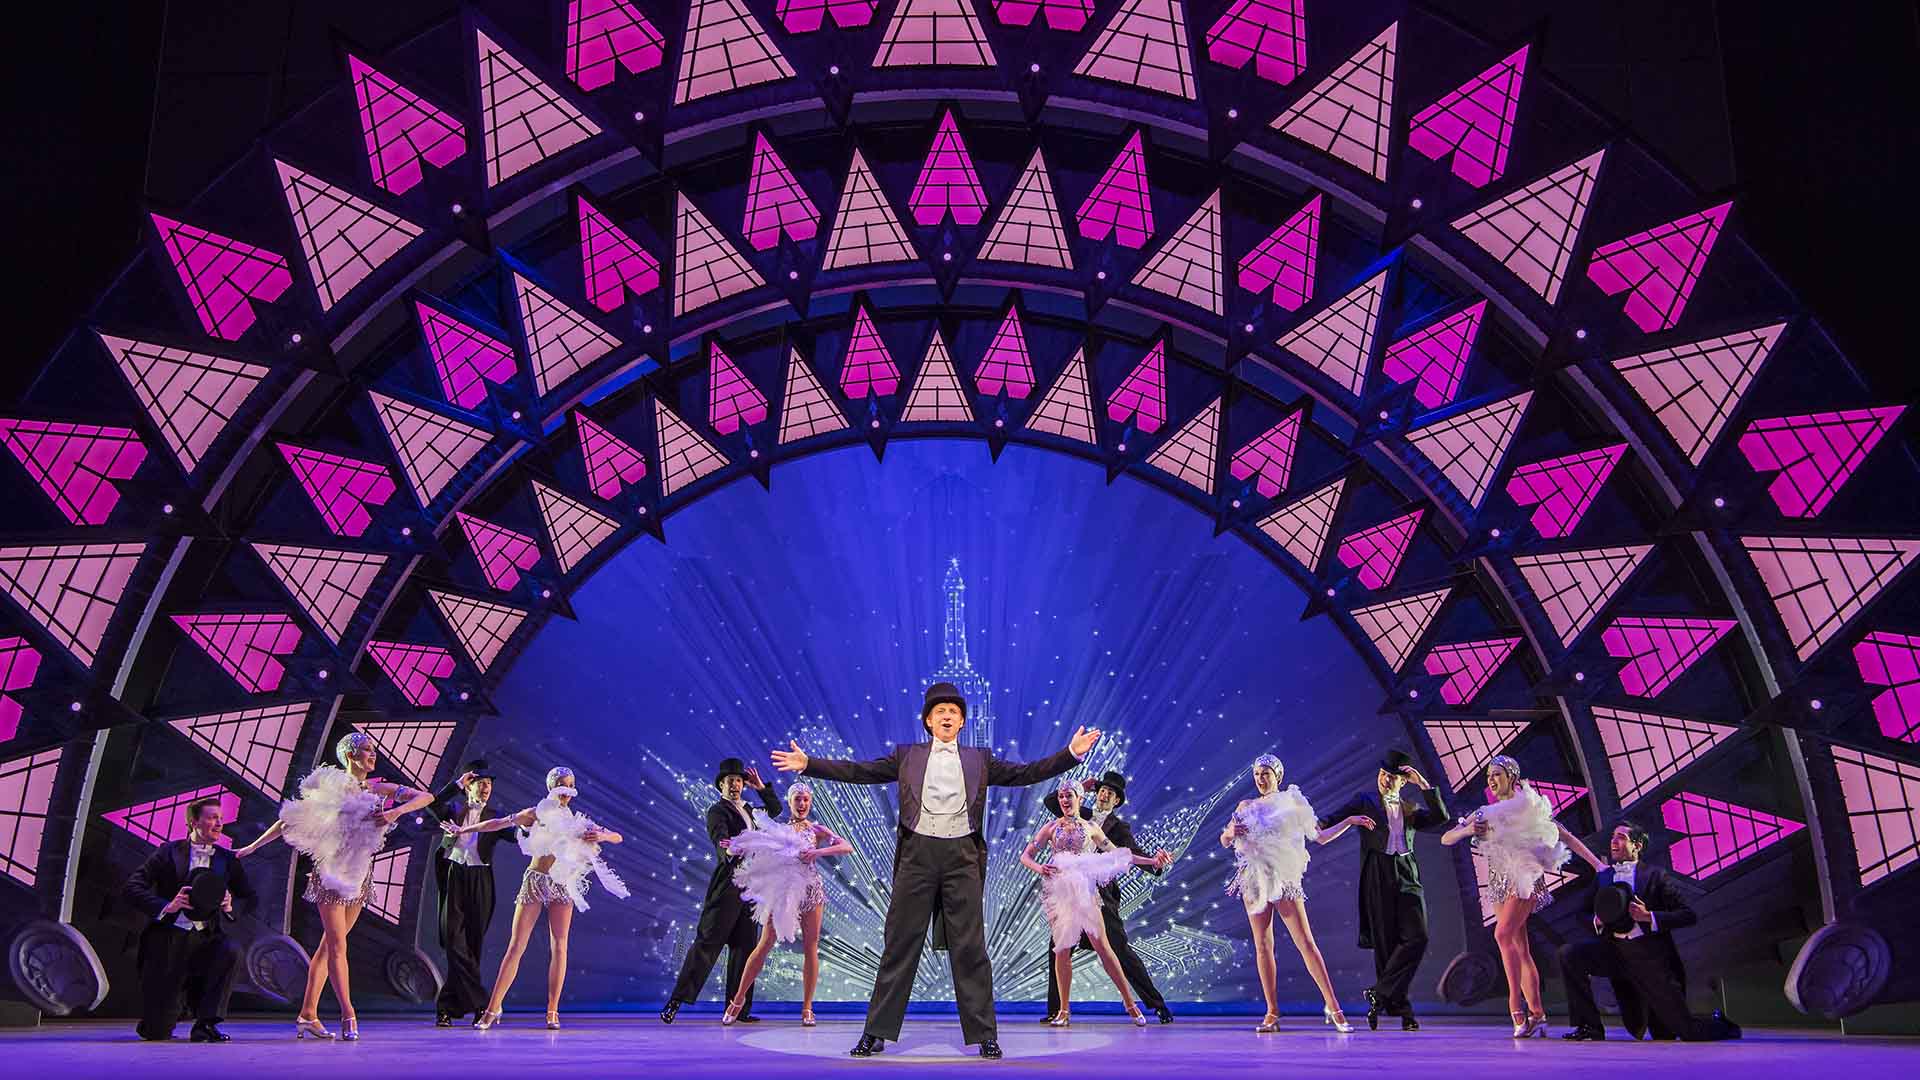 Tony Award-Winning Broadway Musical 'An American in Paris' Is Coming to Australia in 2022